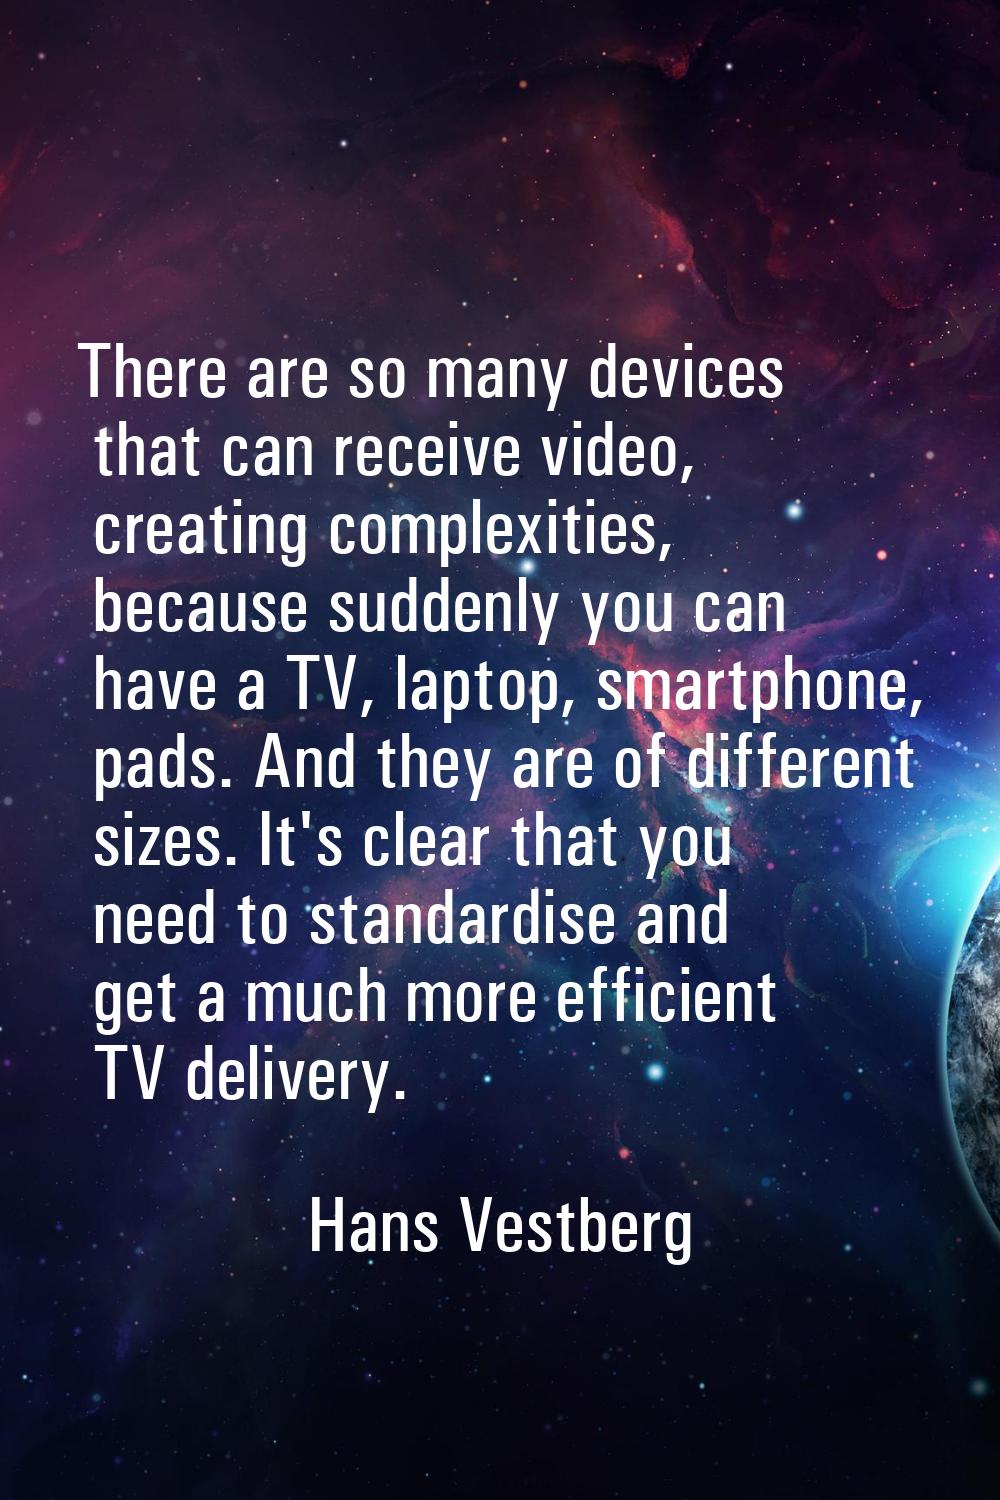 There are so many devices that can receive video, creating complexities, because suddenly you can h